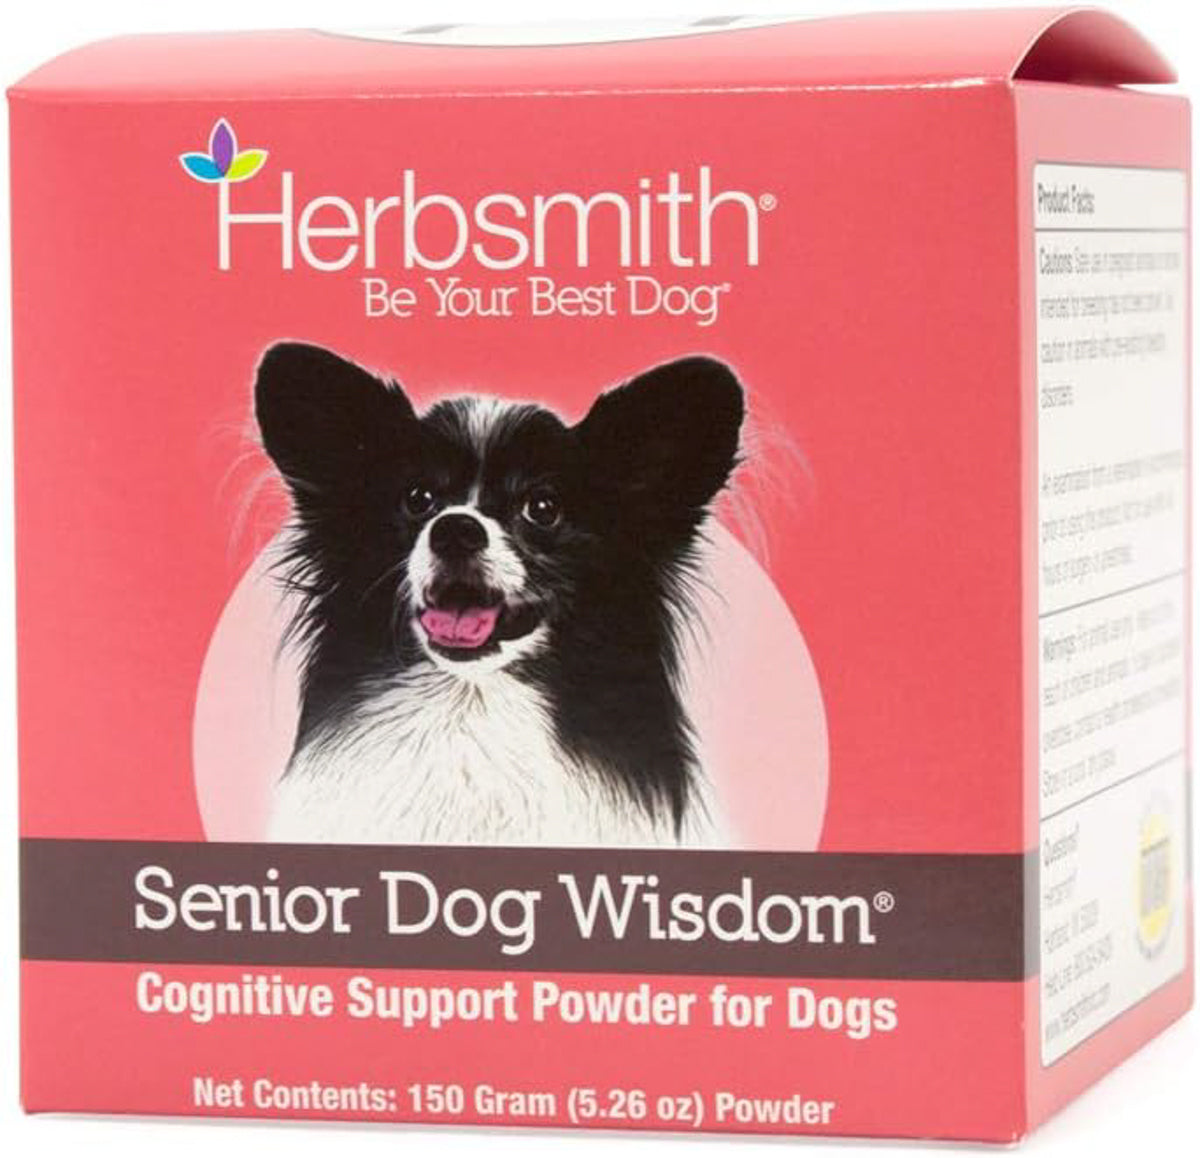 A salmon pink box of Senior Dog Wisdom cognitive support powder for dogs showing a black and white pomeranian dog